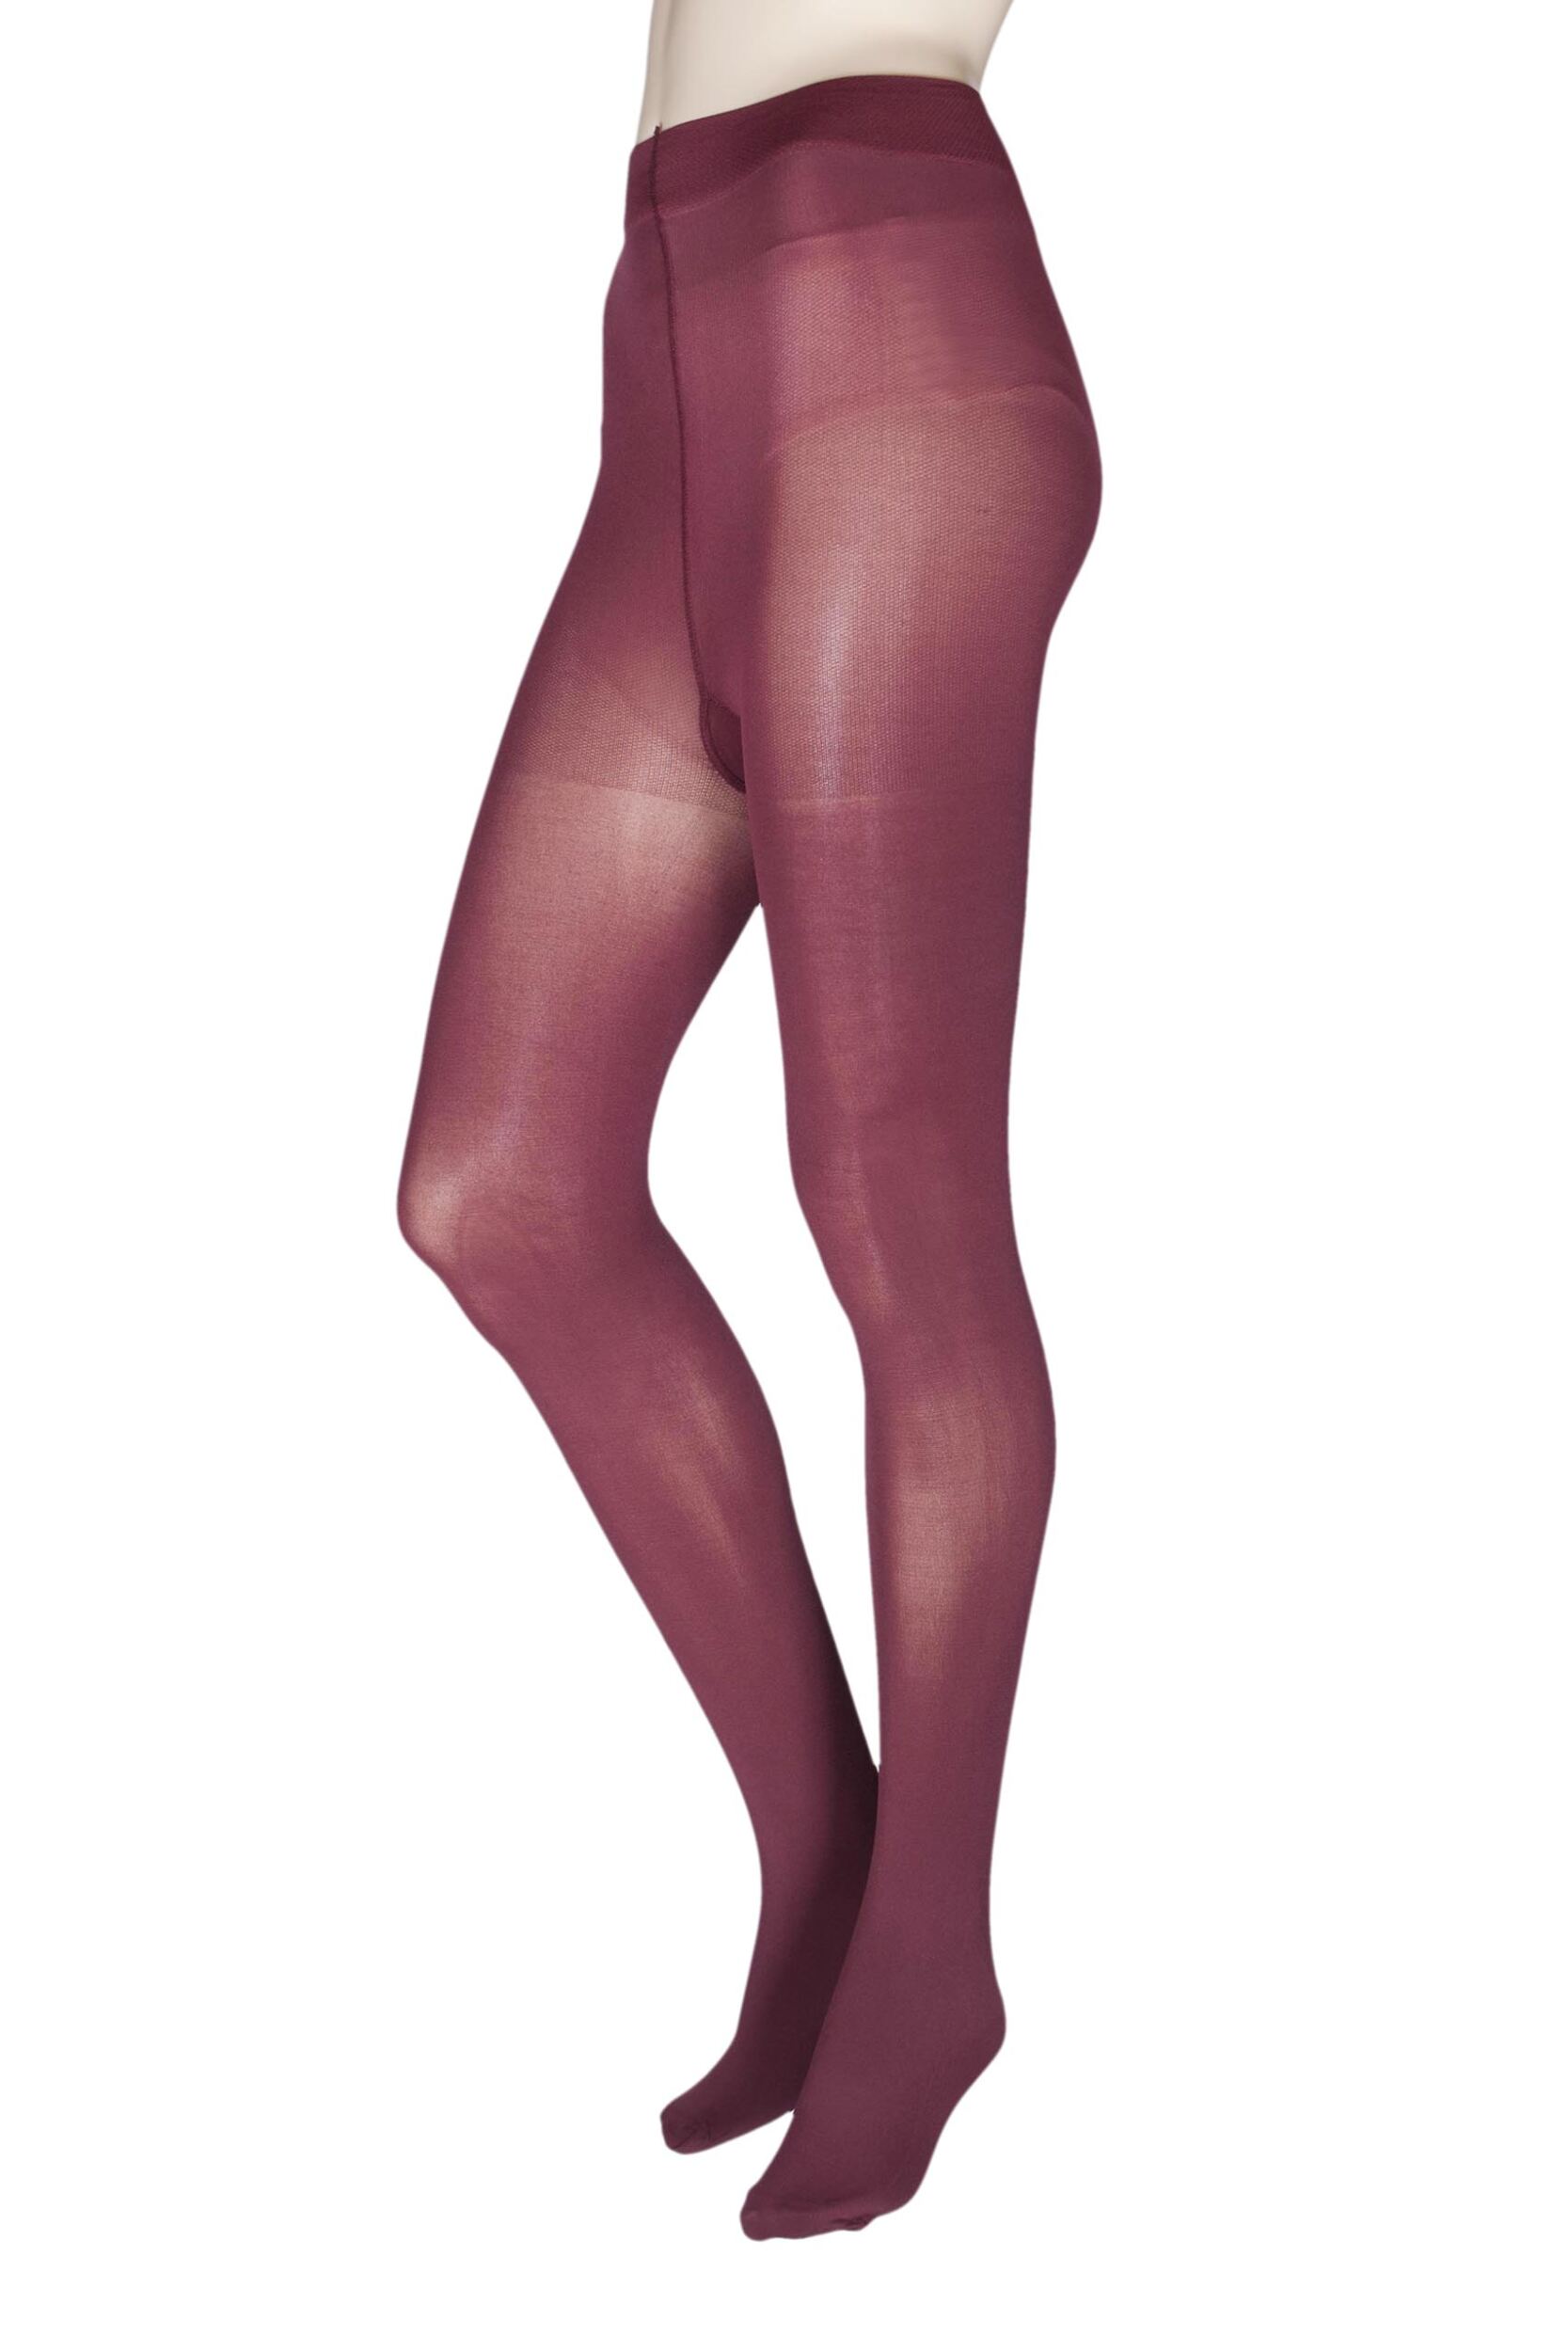 1 Pair Bordeaux 60 Denier Opaque Tights Ladies Extra Large - Charnos